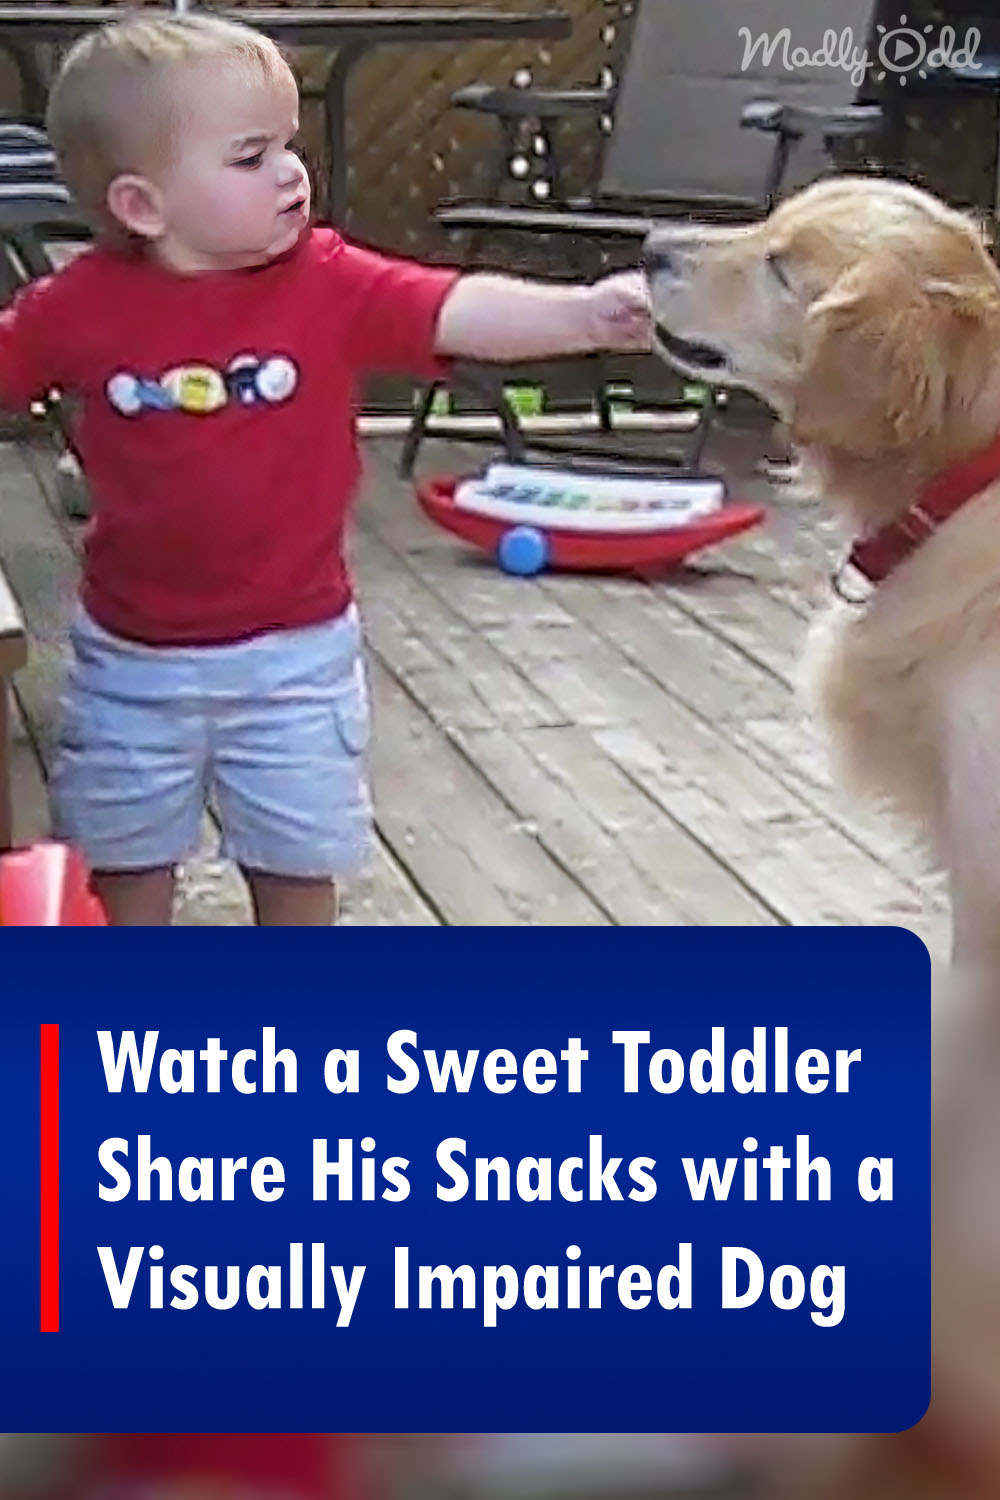 Watch a Sweet Toddler Share His Snacks with a Visually Impaired Dog